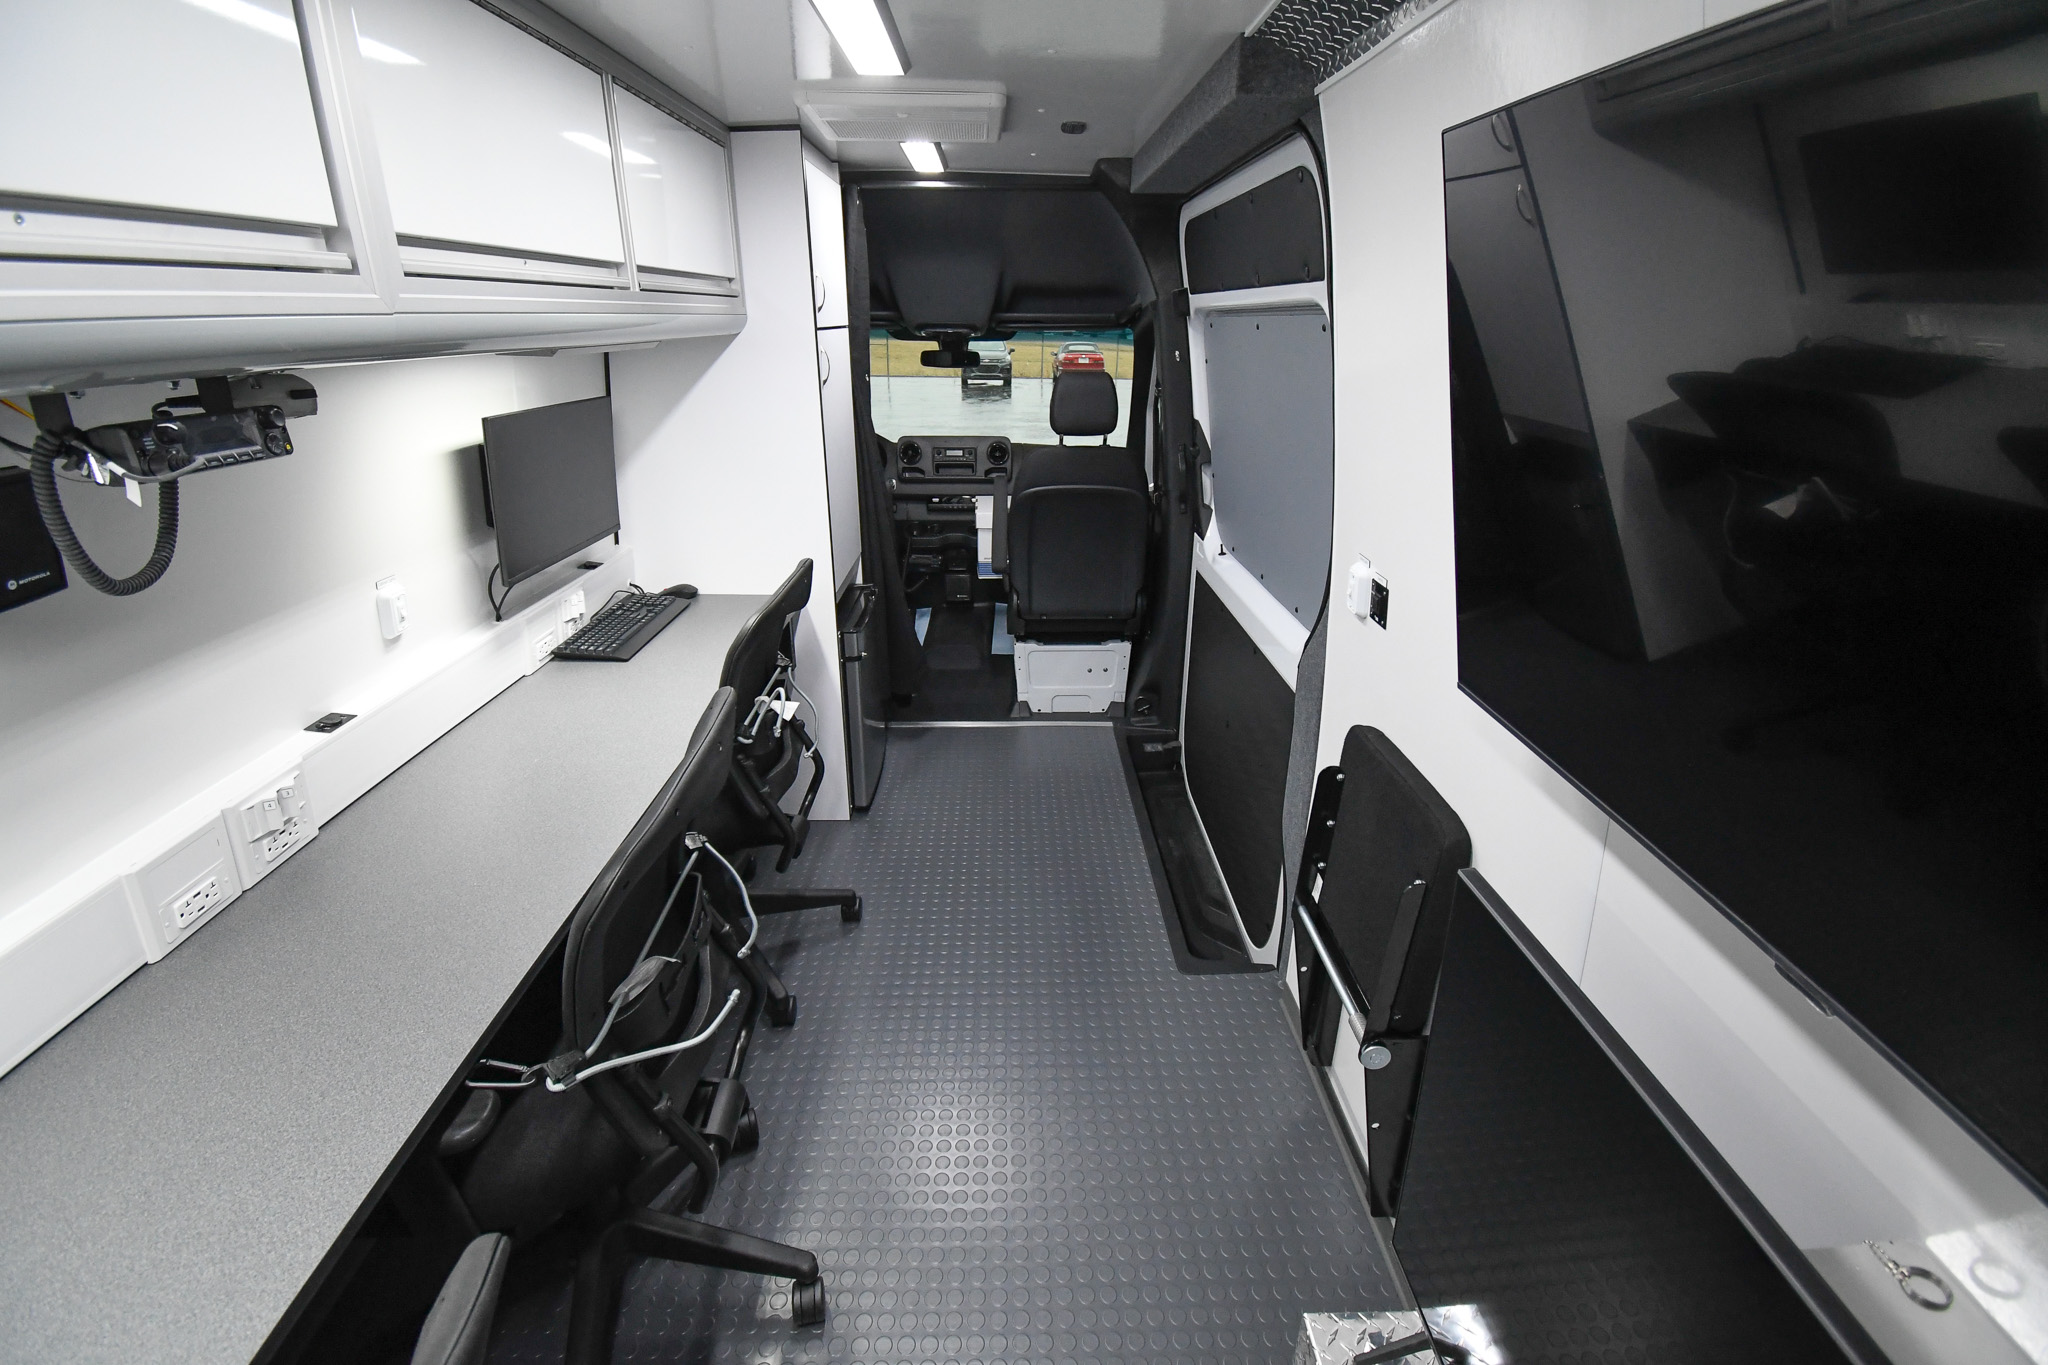 A back-to-front view inside the unit made for the San Joaquin County Sheriff's Office.